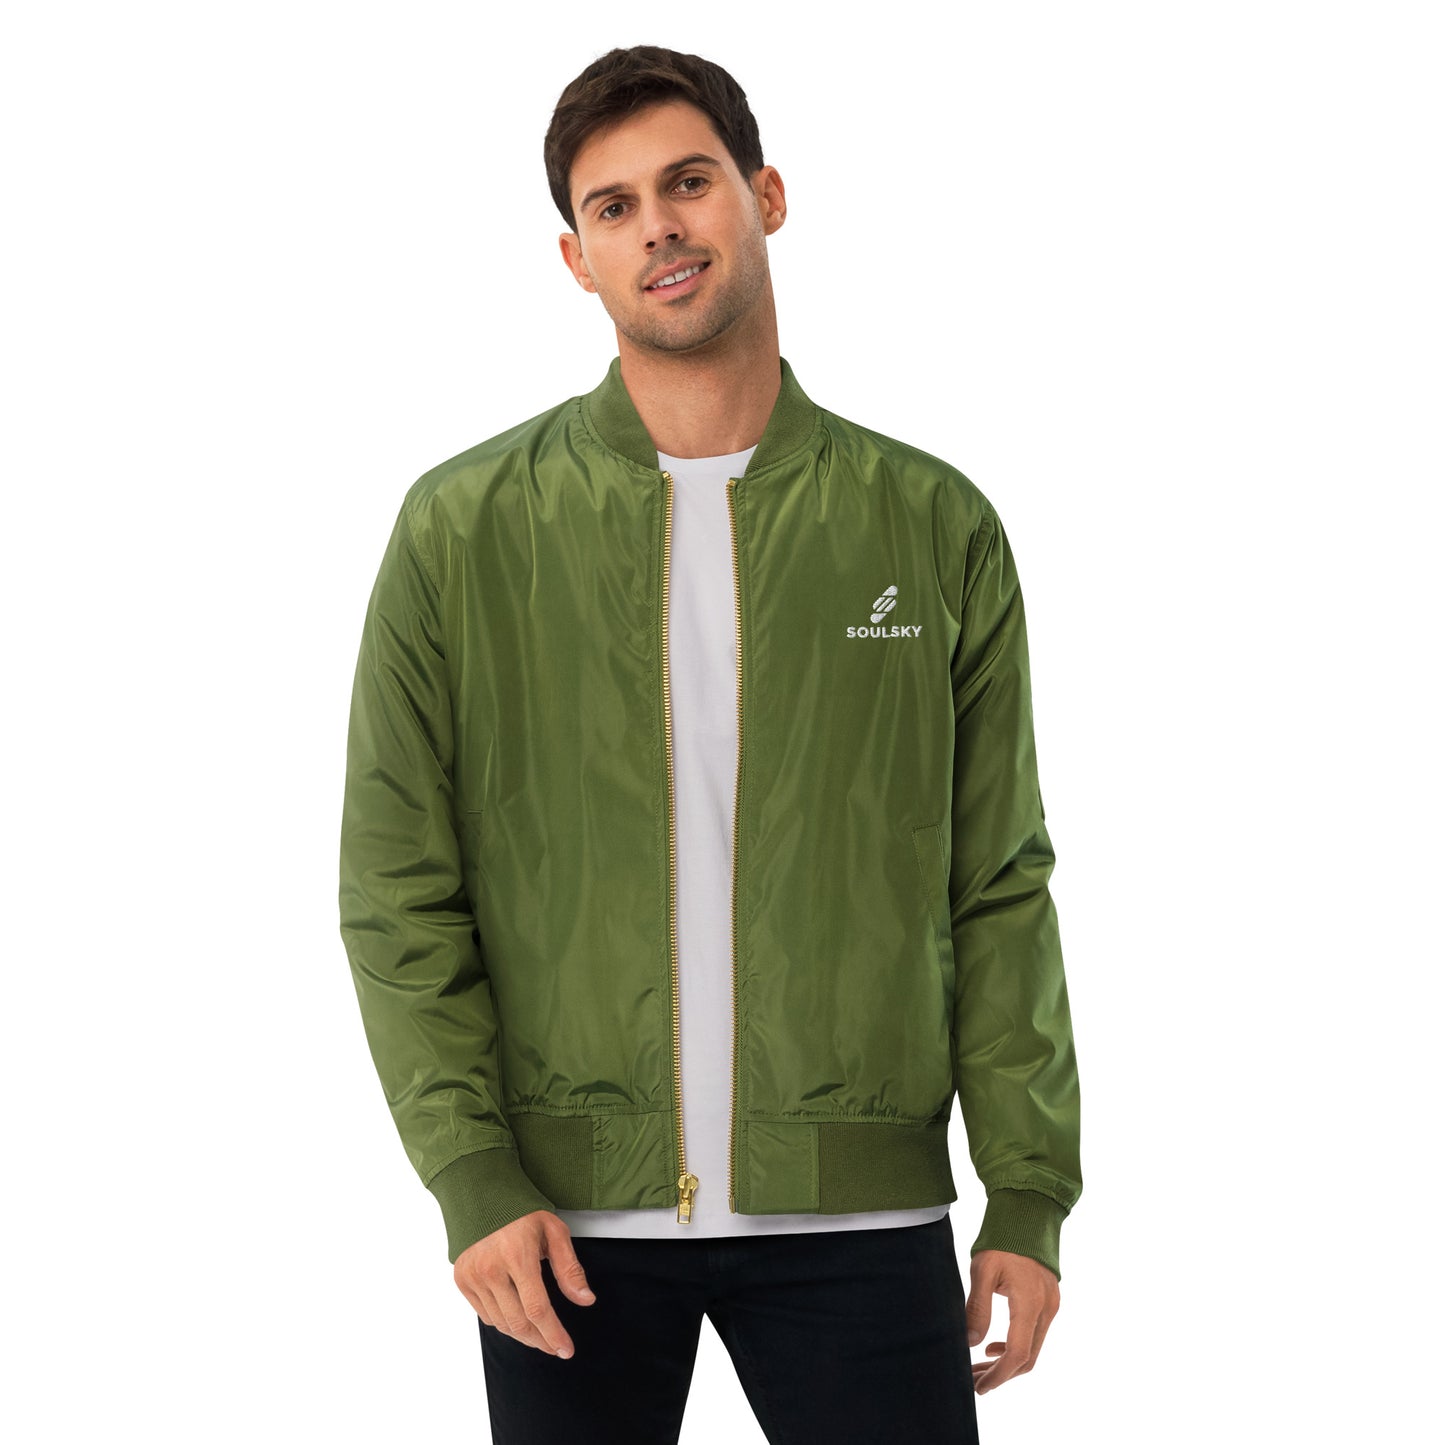 NEVER LOSE HOPE Premium Bomber Jacket - Army Green